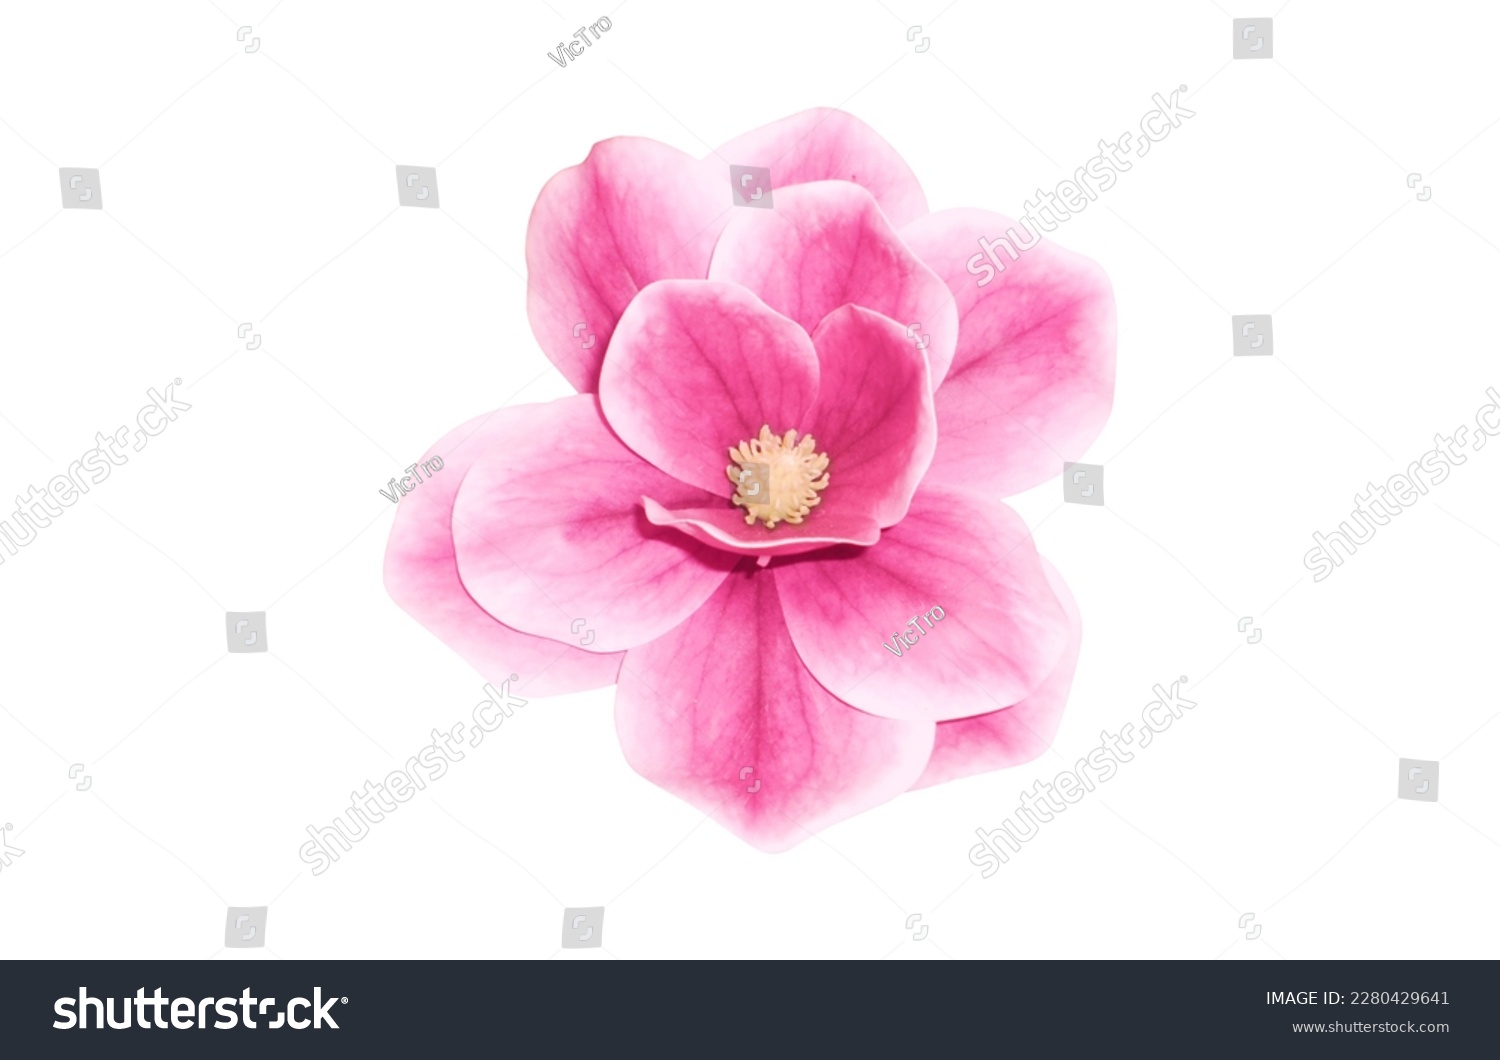 Fantastic flower with pink petals. Beautiful image isolated on white background. Ideal for the representation of a perfume, aroma or expression of spring summer or freshness #2280429641